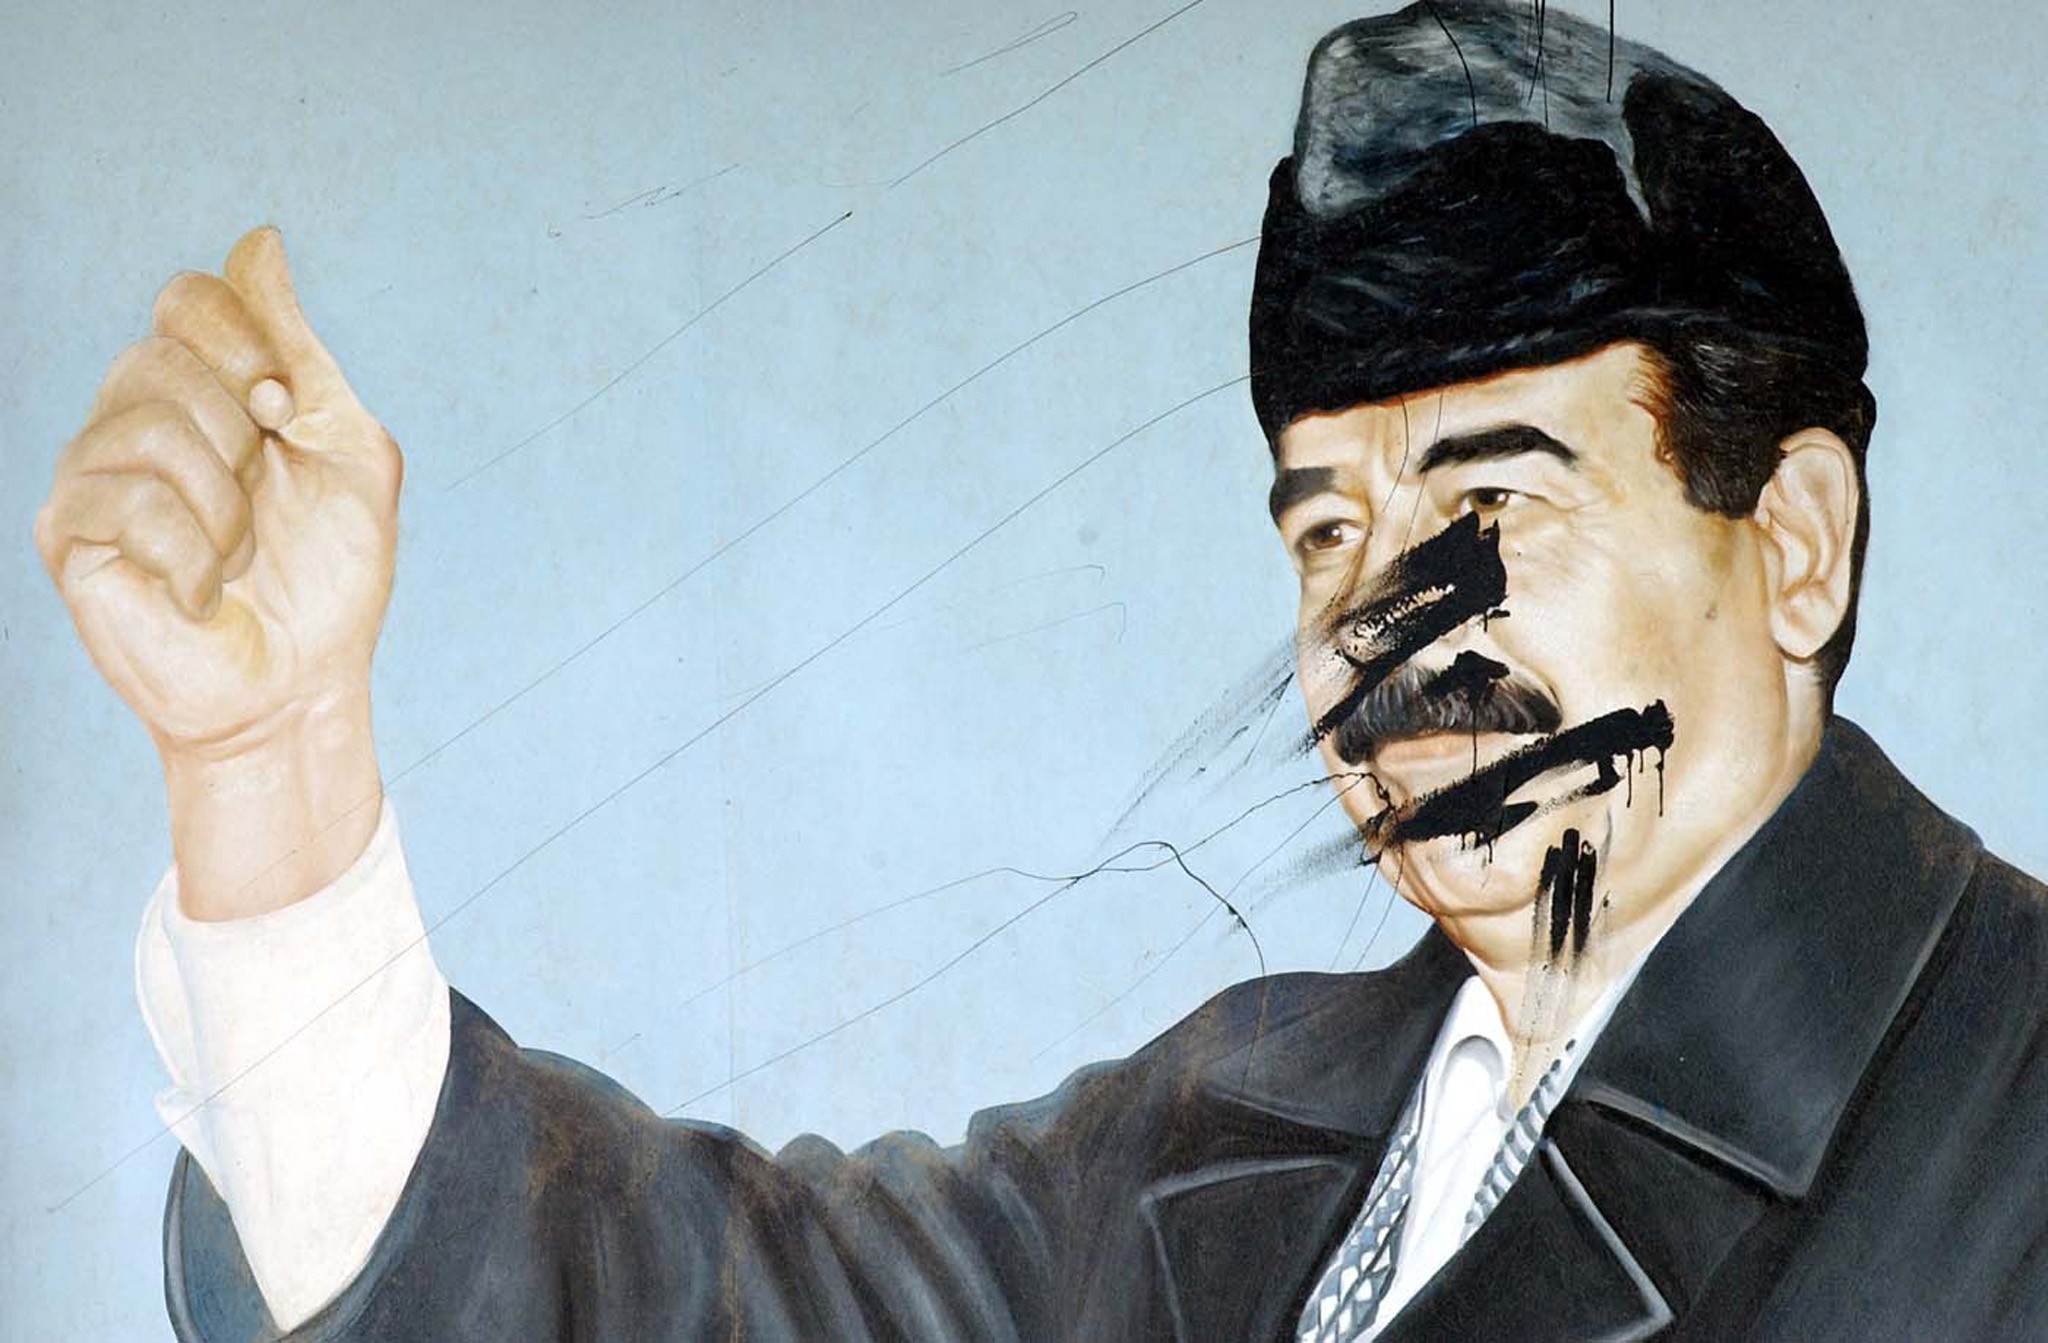 A defaced mural of Saddam Hussein.